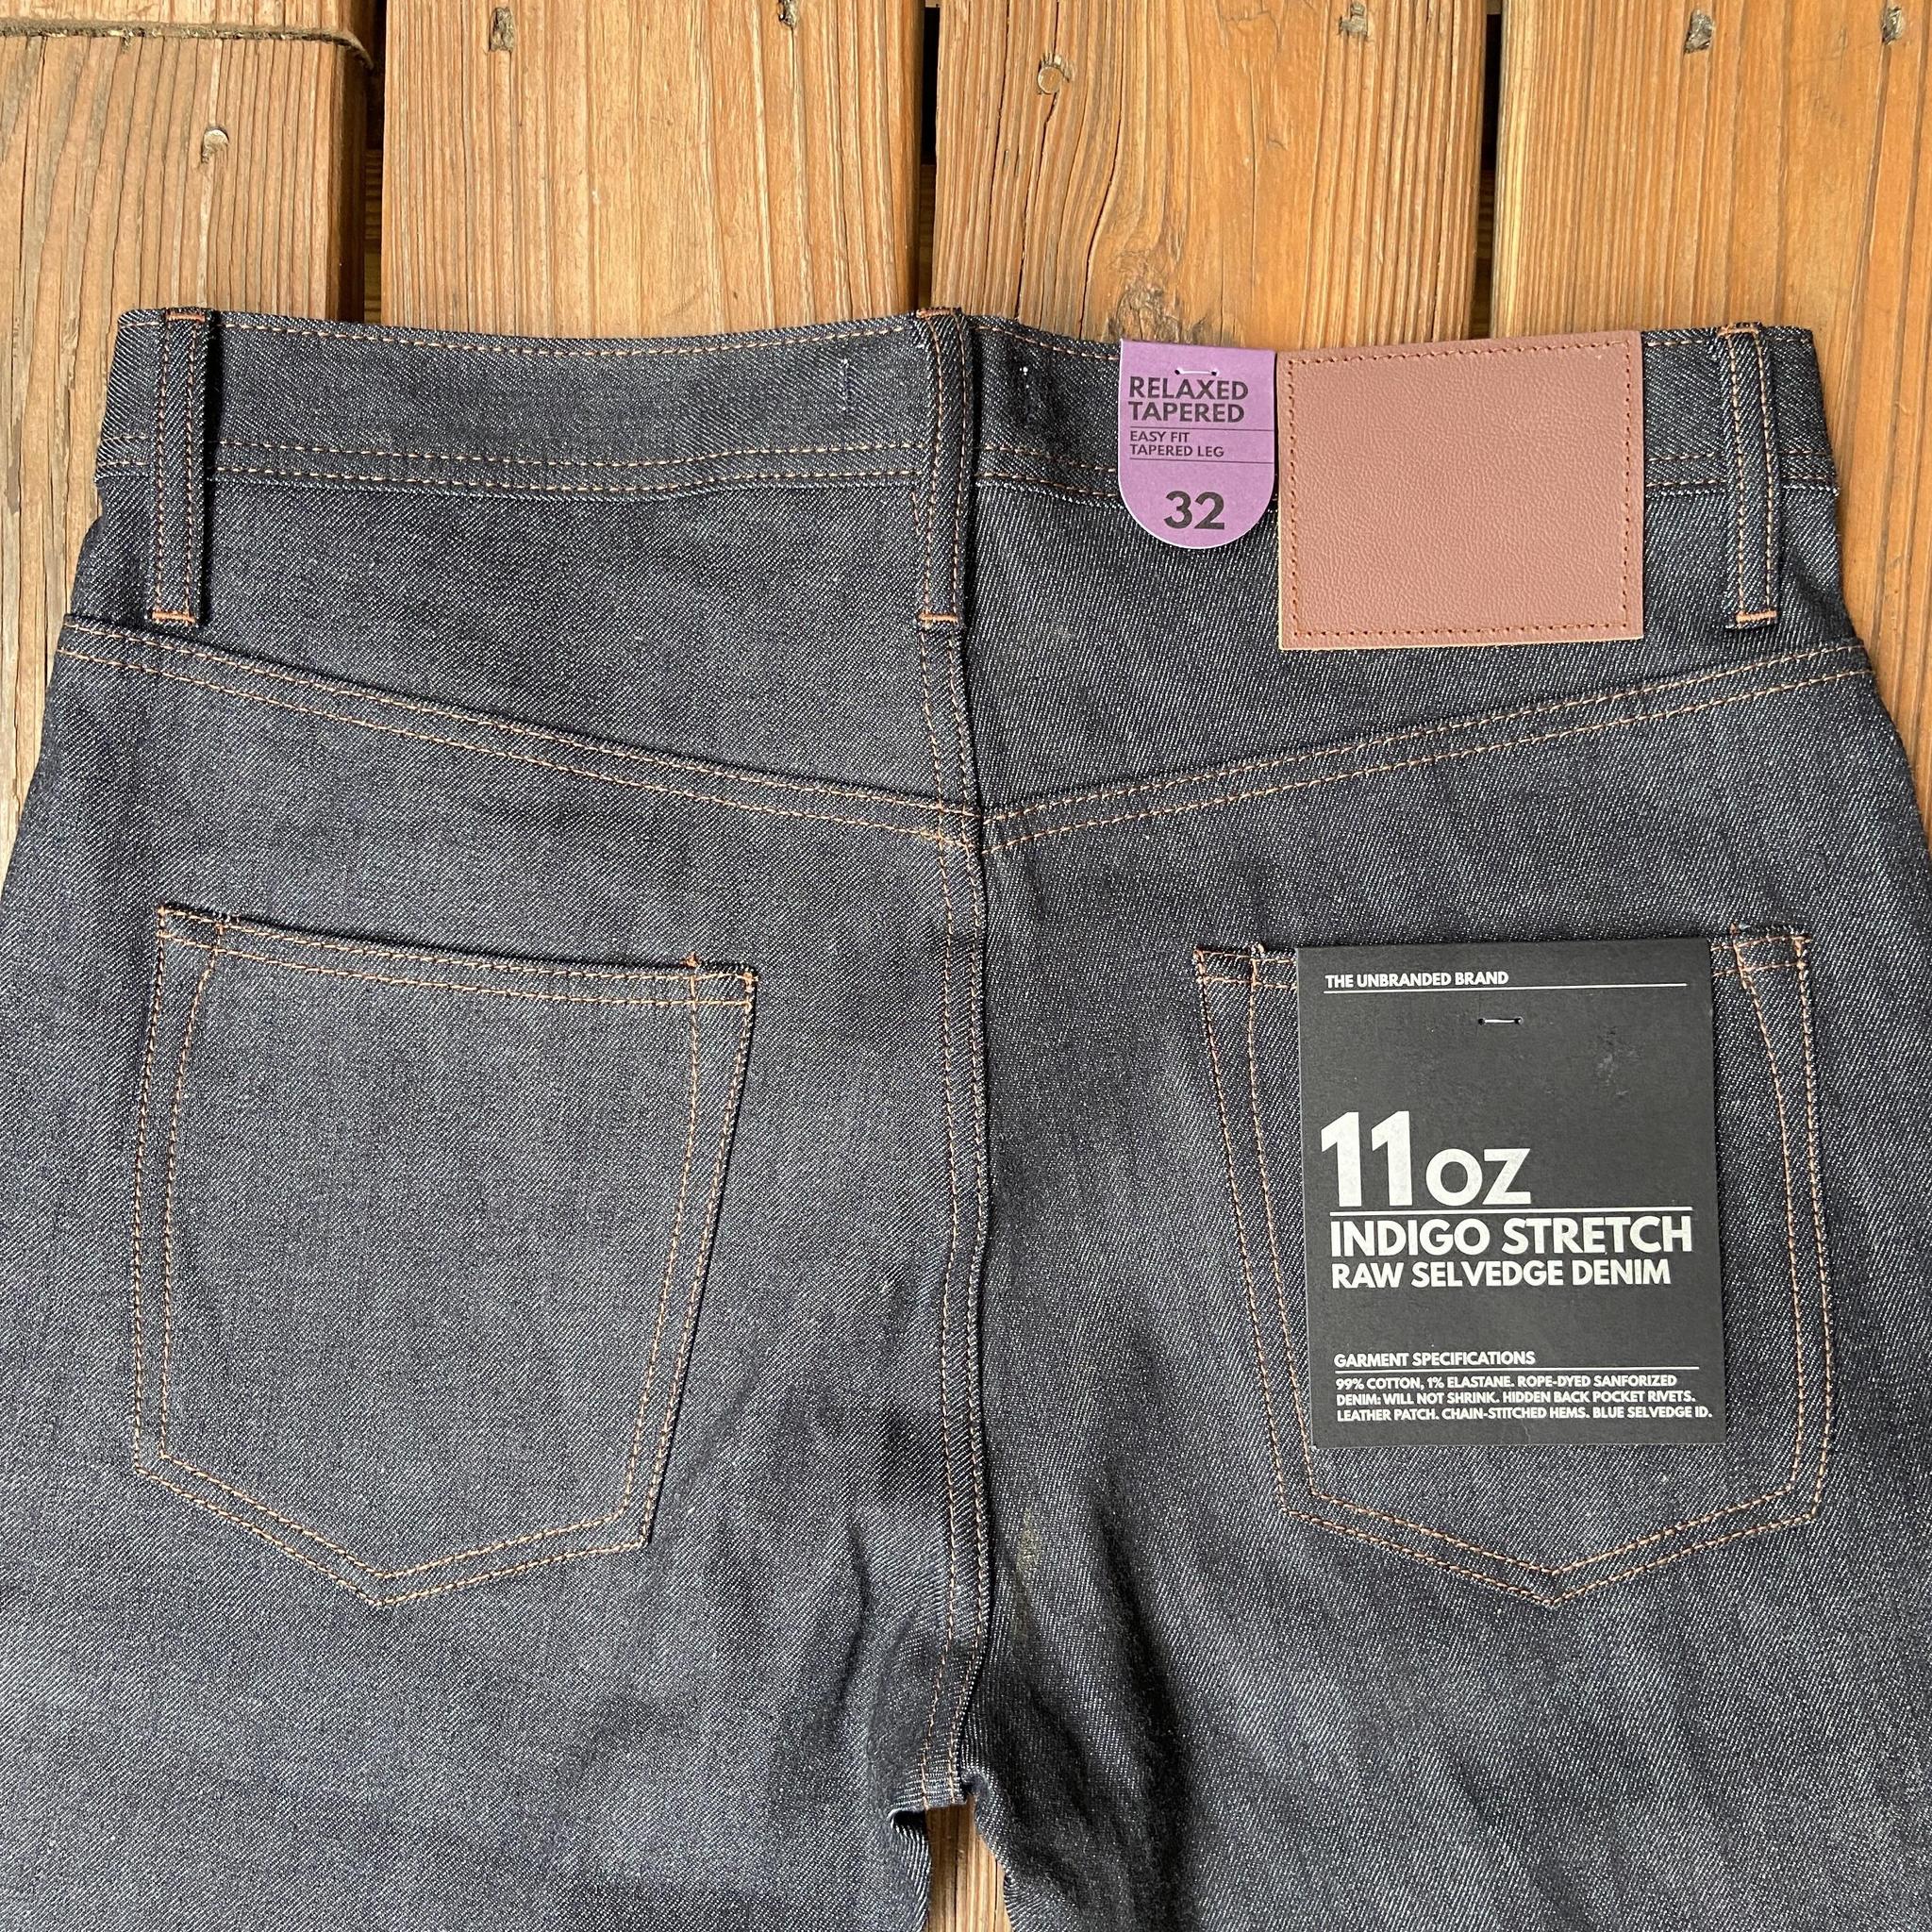 NEW: UB622 11oz Stretch Selvedge in - The Unbranded Brand